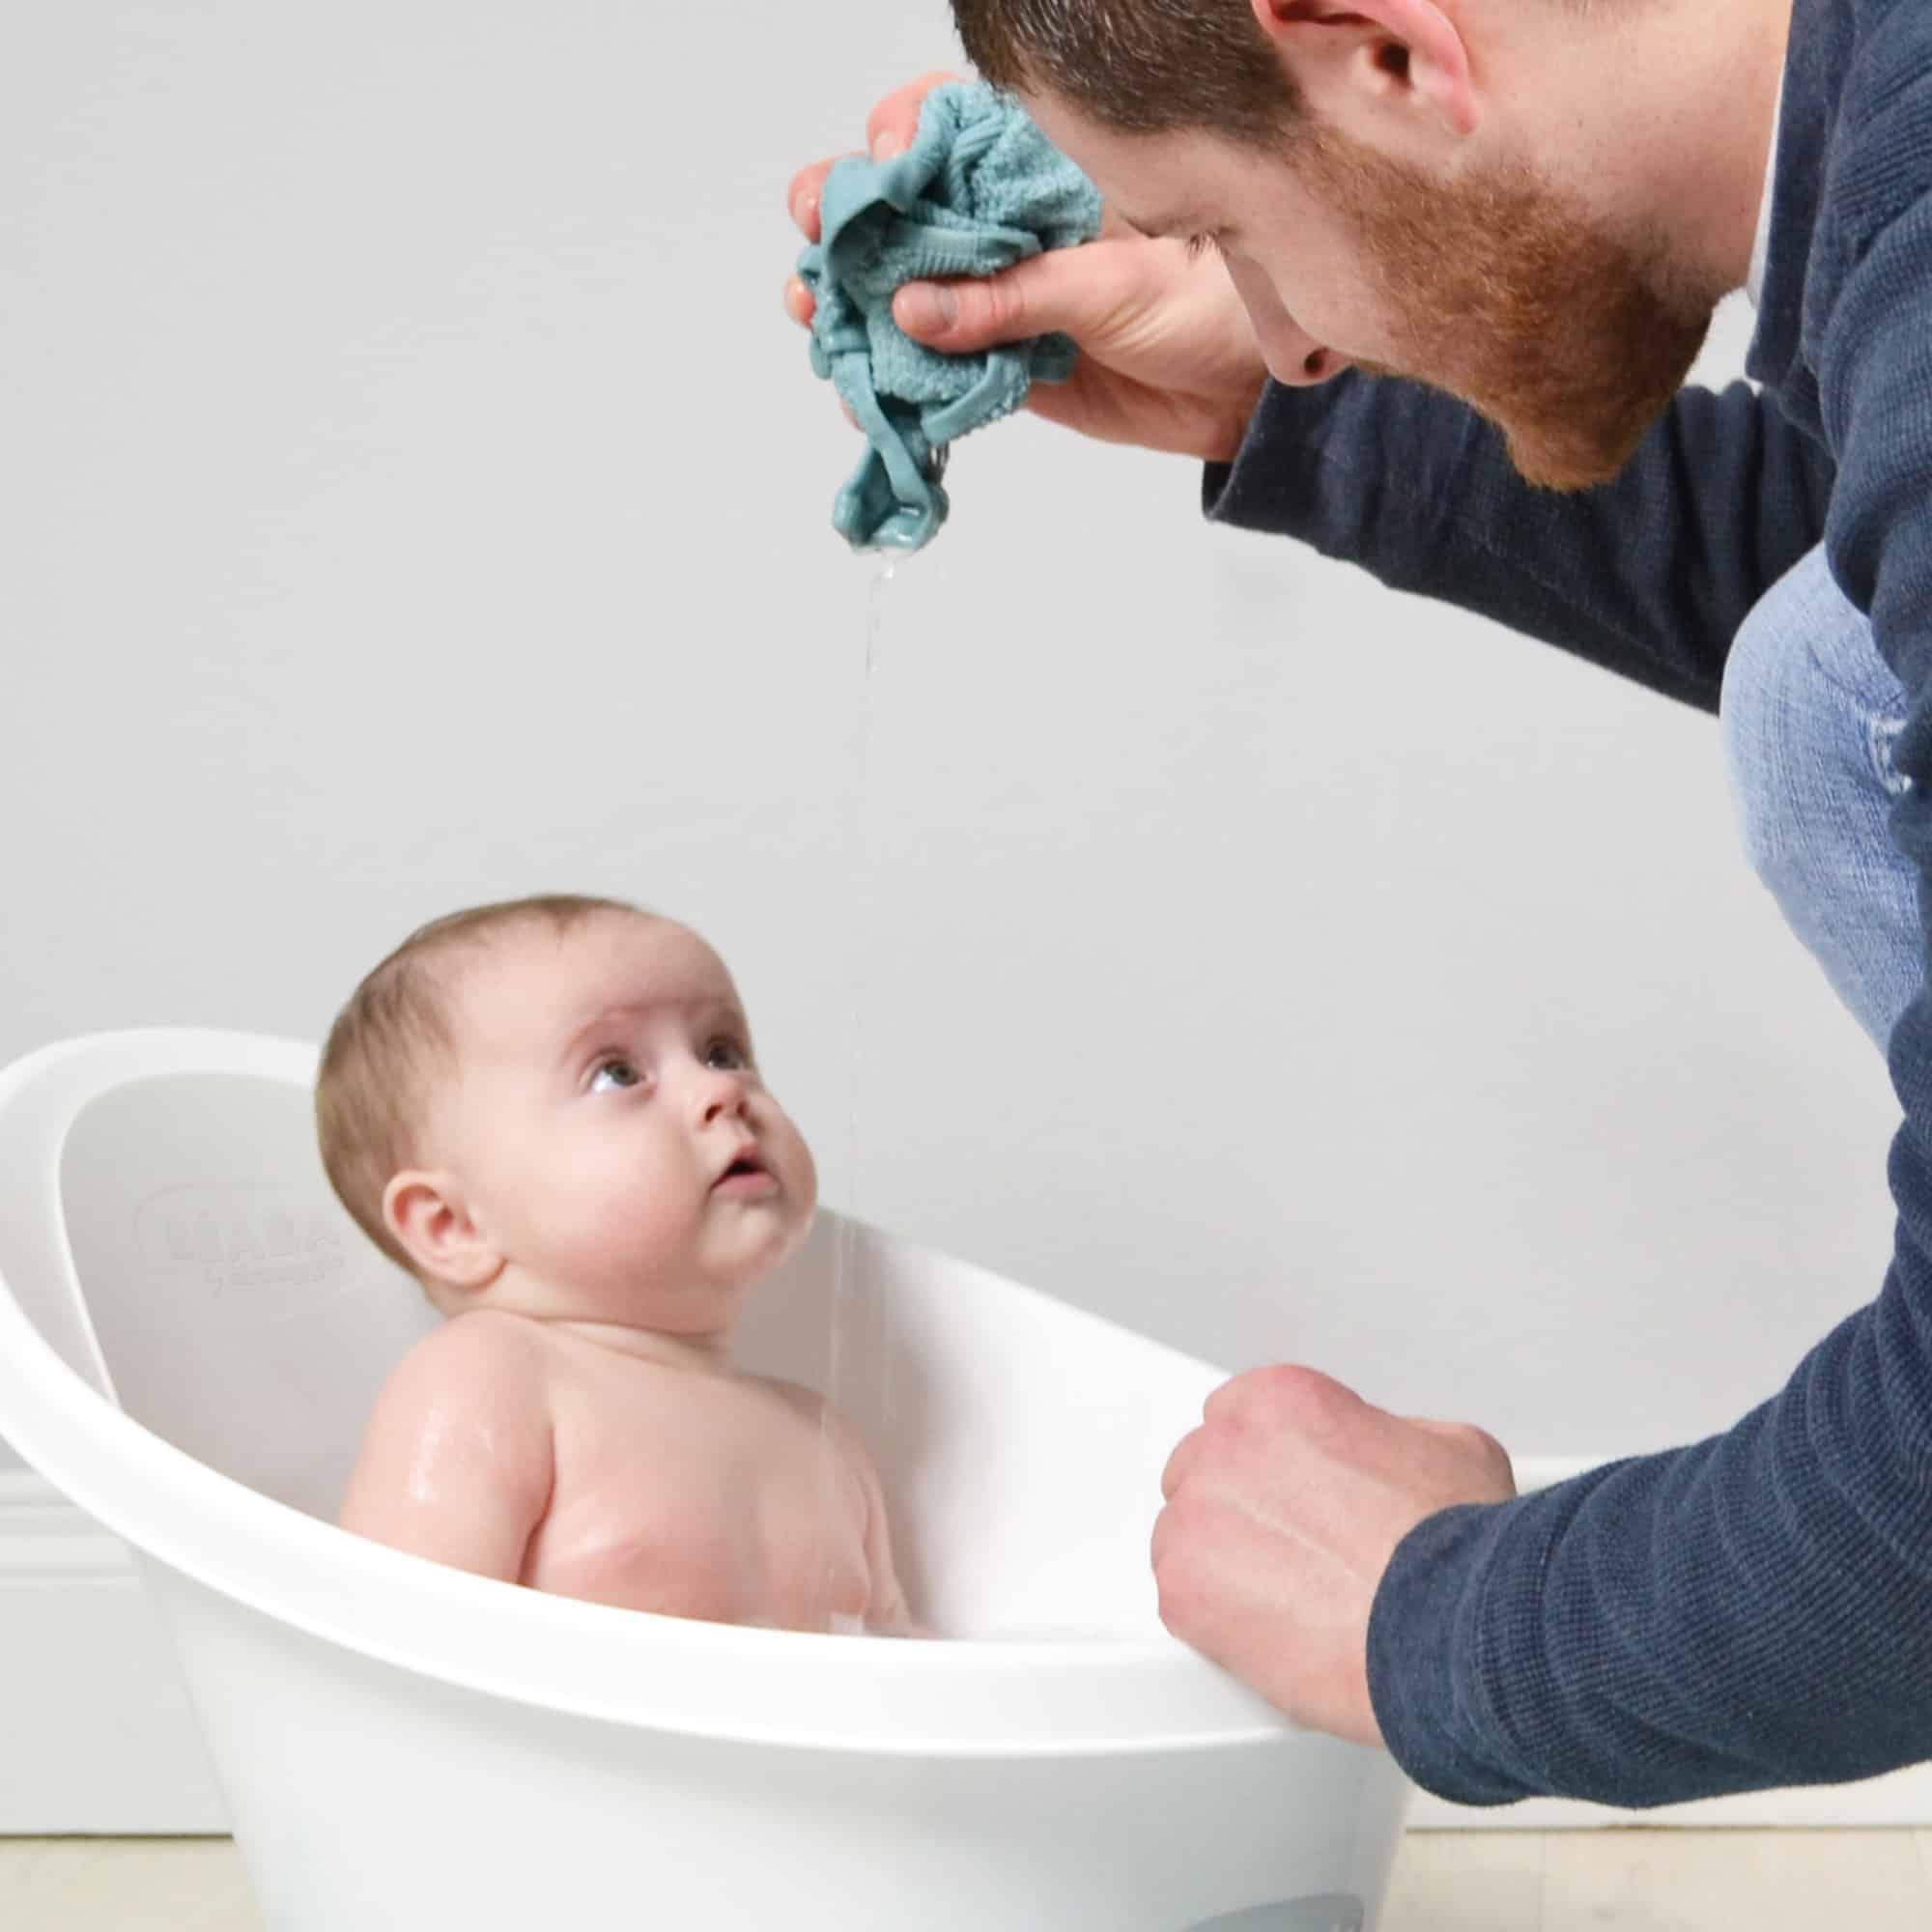 Dad cleaning baby in Beaba by Shnuggle Baby bath